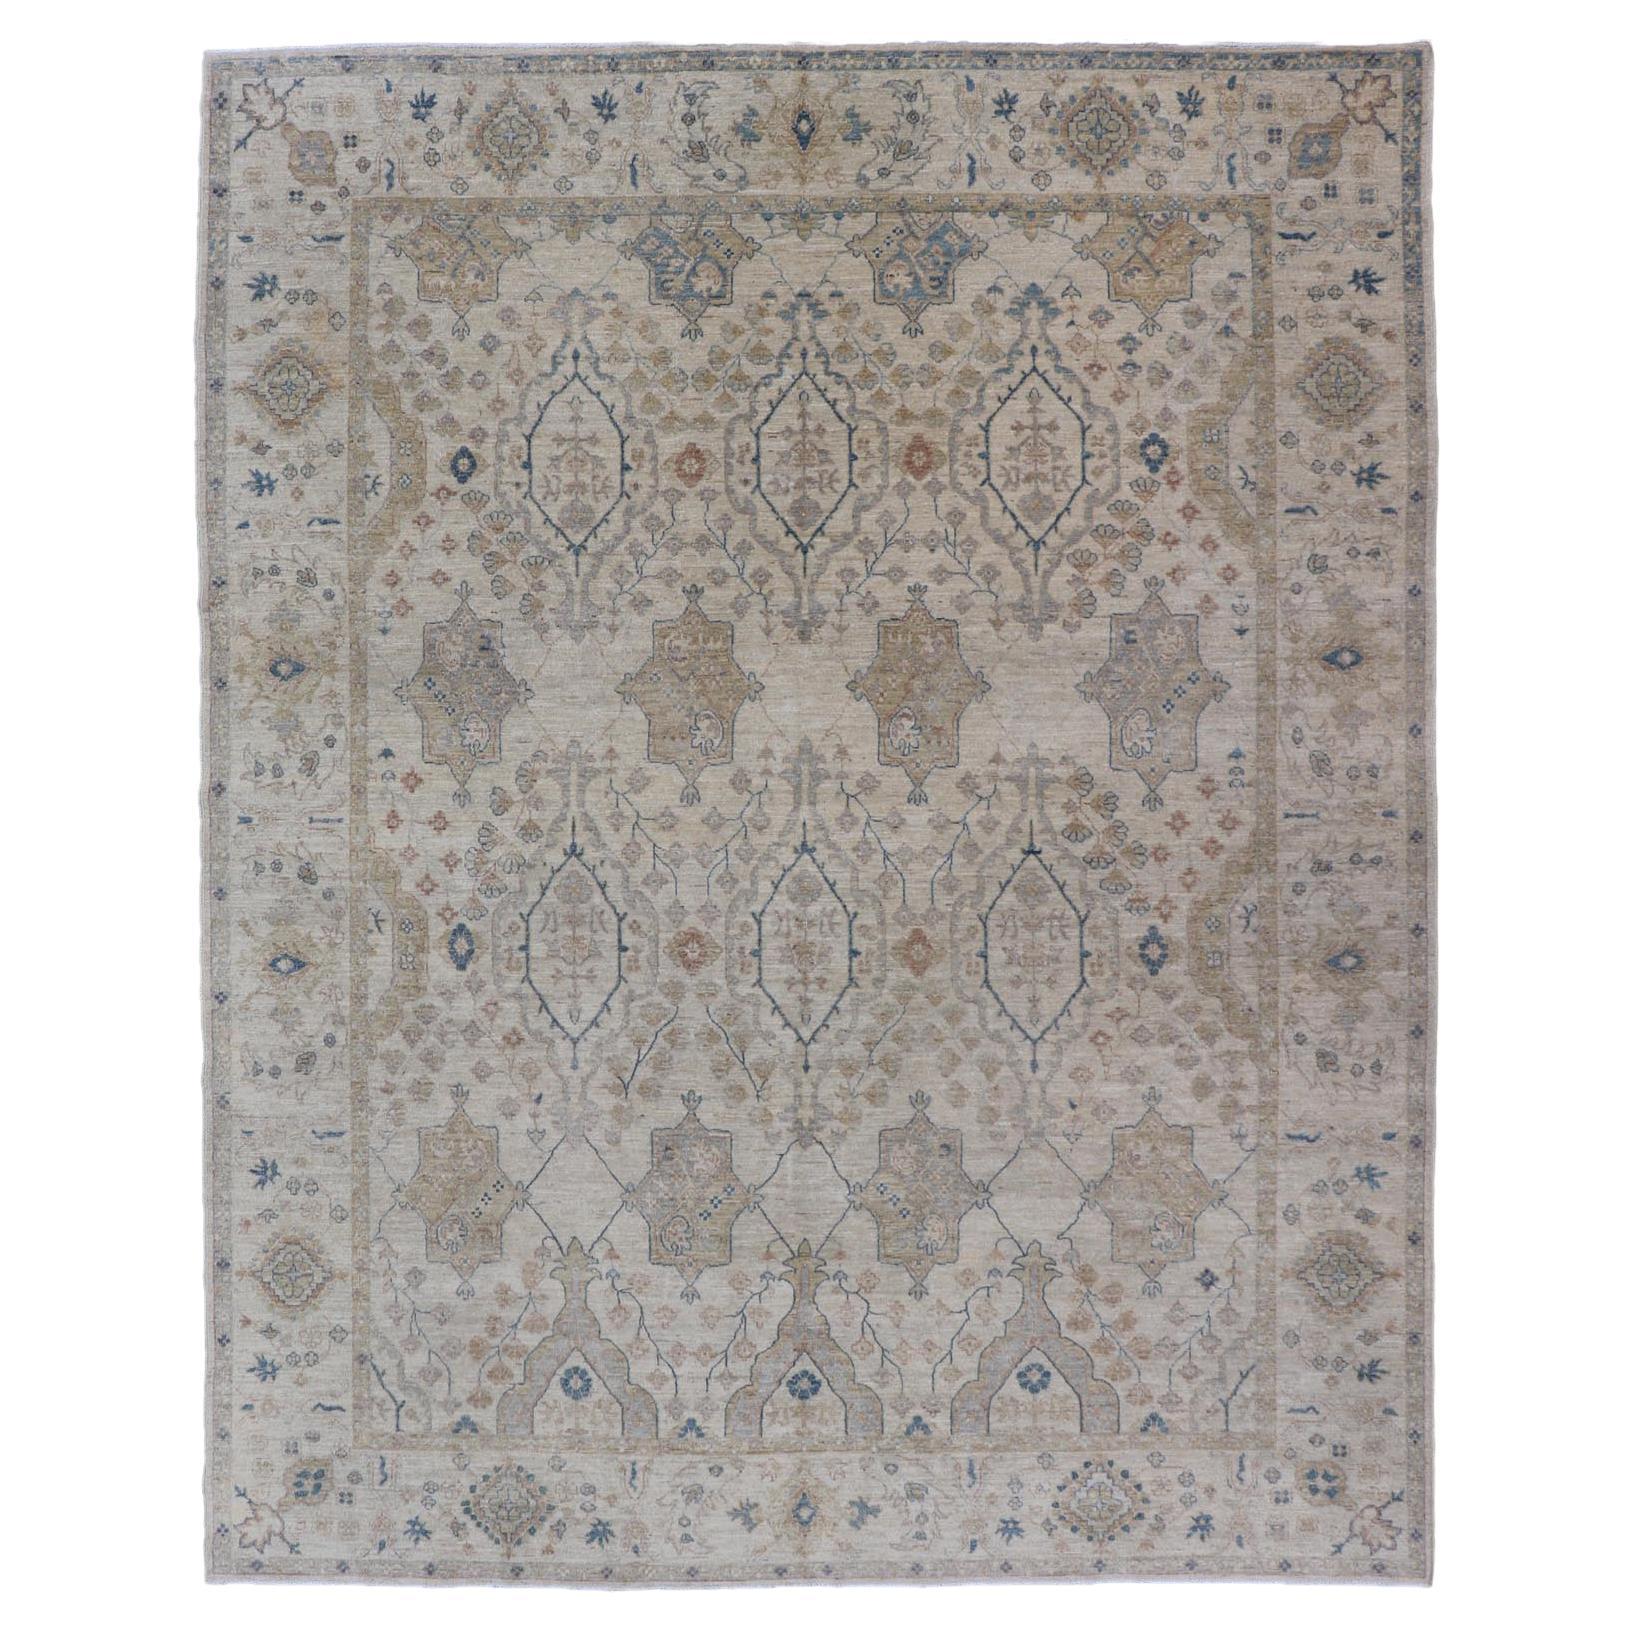  Afghan Khotan Rug with All-Over Geometric Pattern in Tan, Taupe, and Light Blue